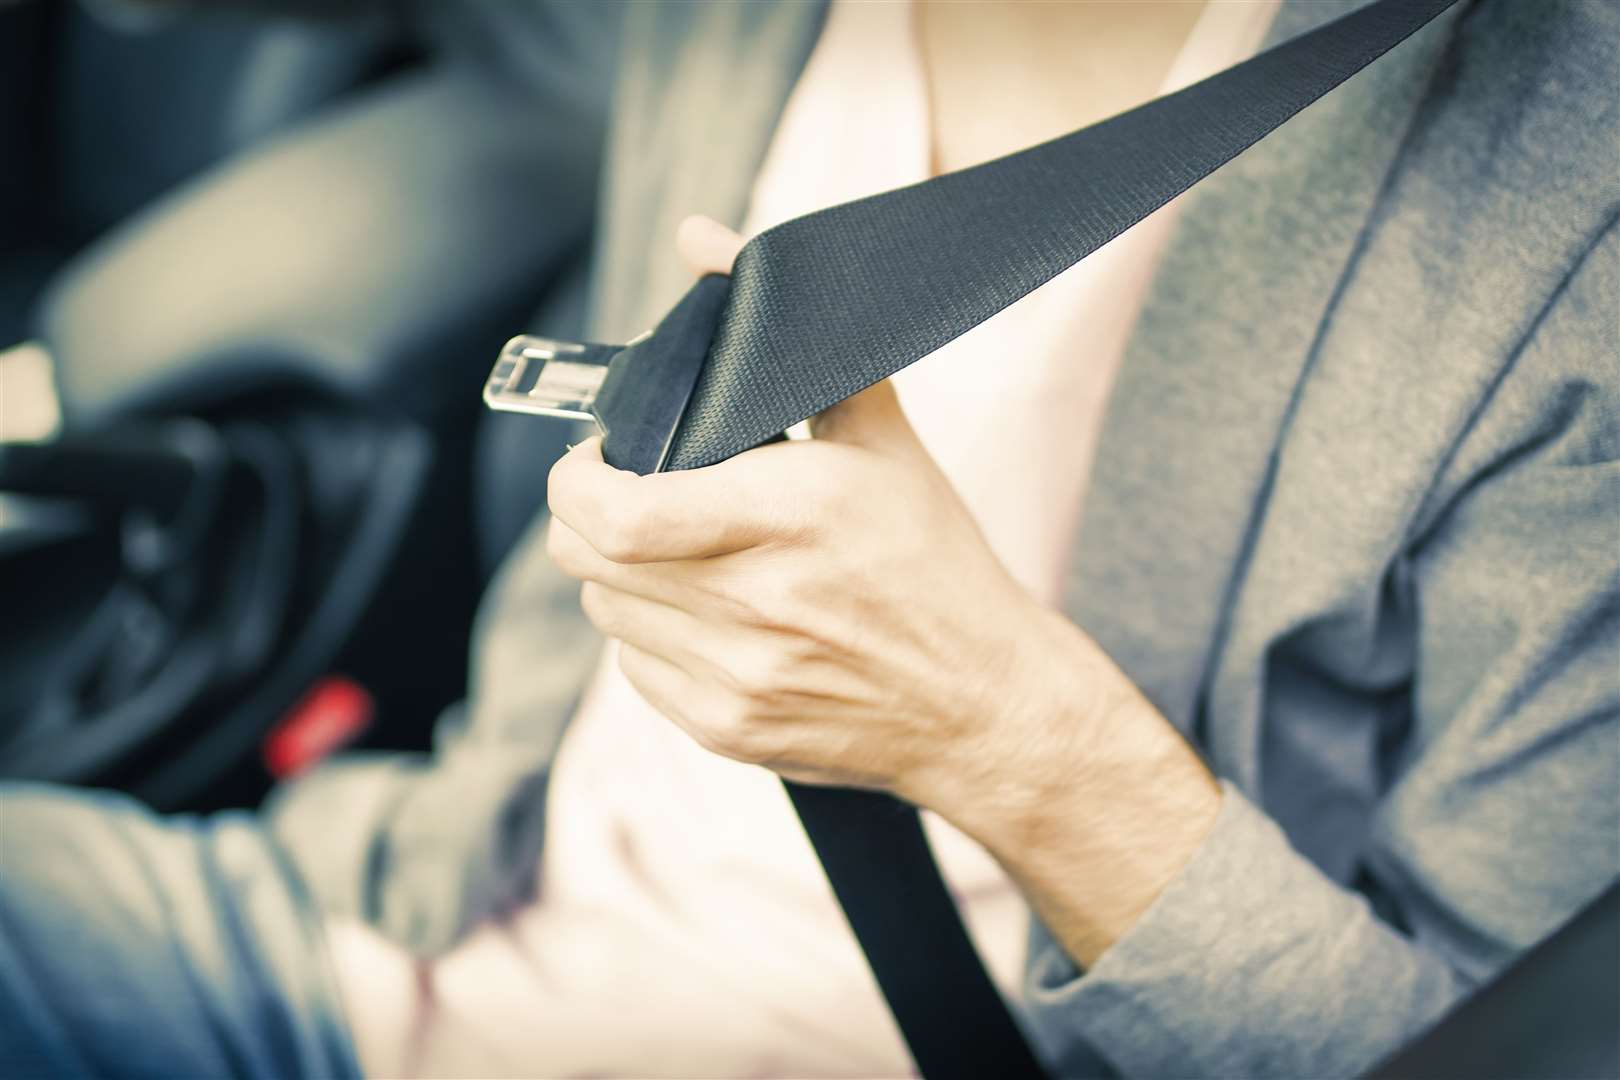 If anyone is caught not wearing a seatbelt when they are supposed to, they could be fined up to £500.